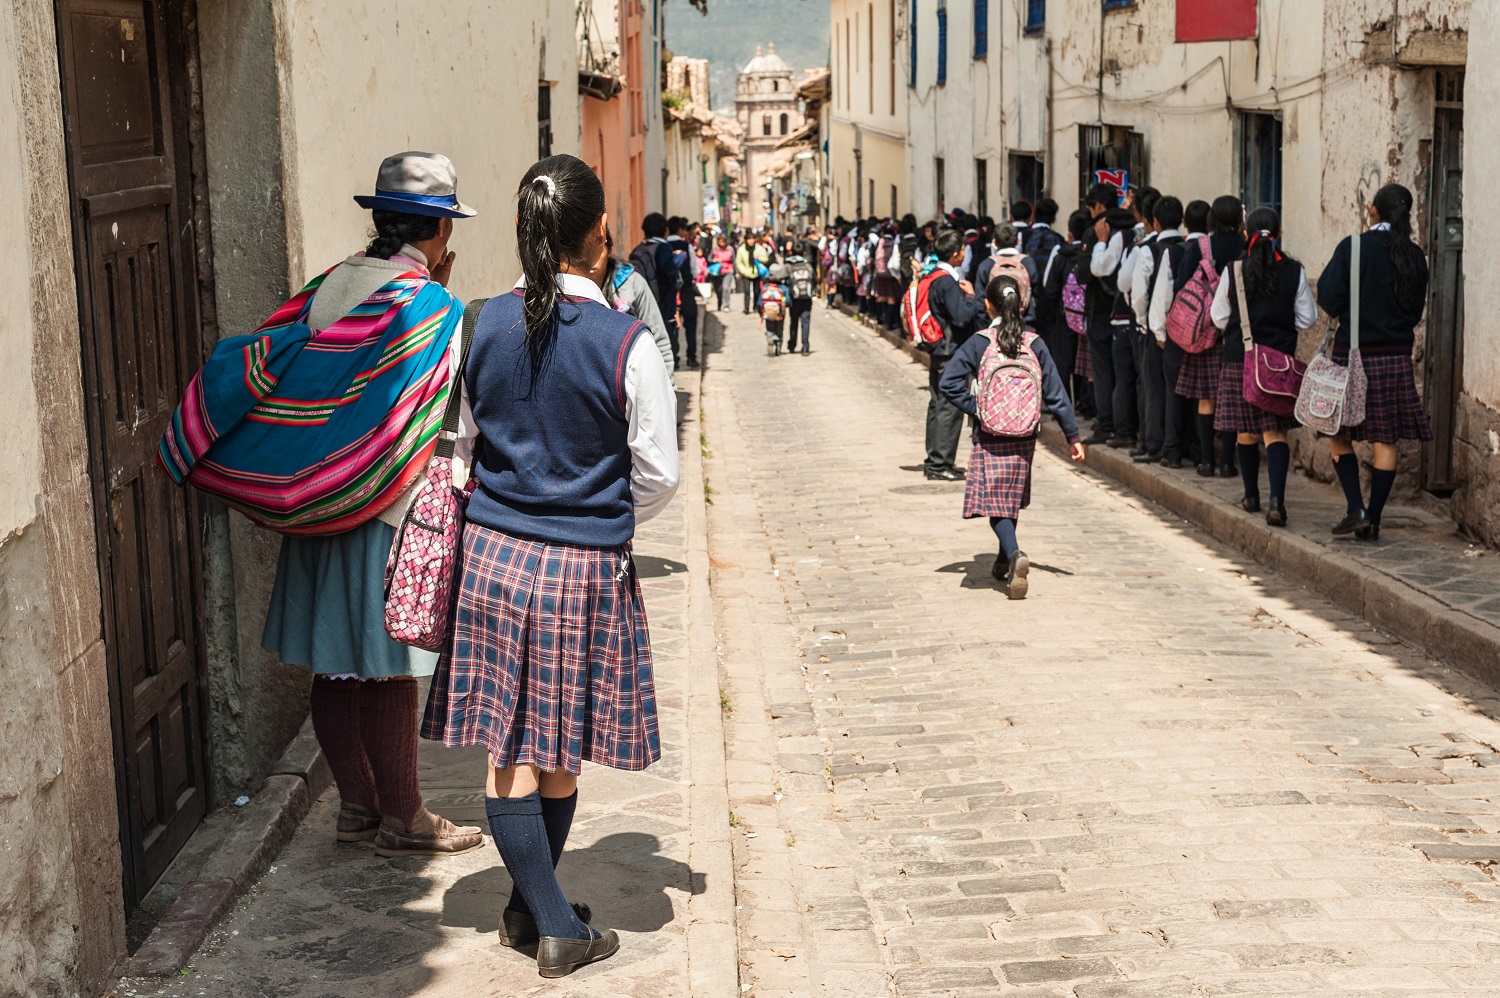 Image of students in Peru